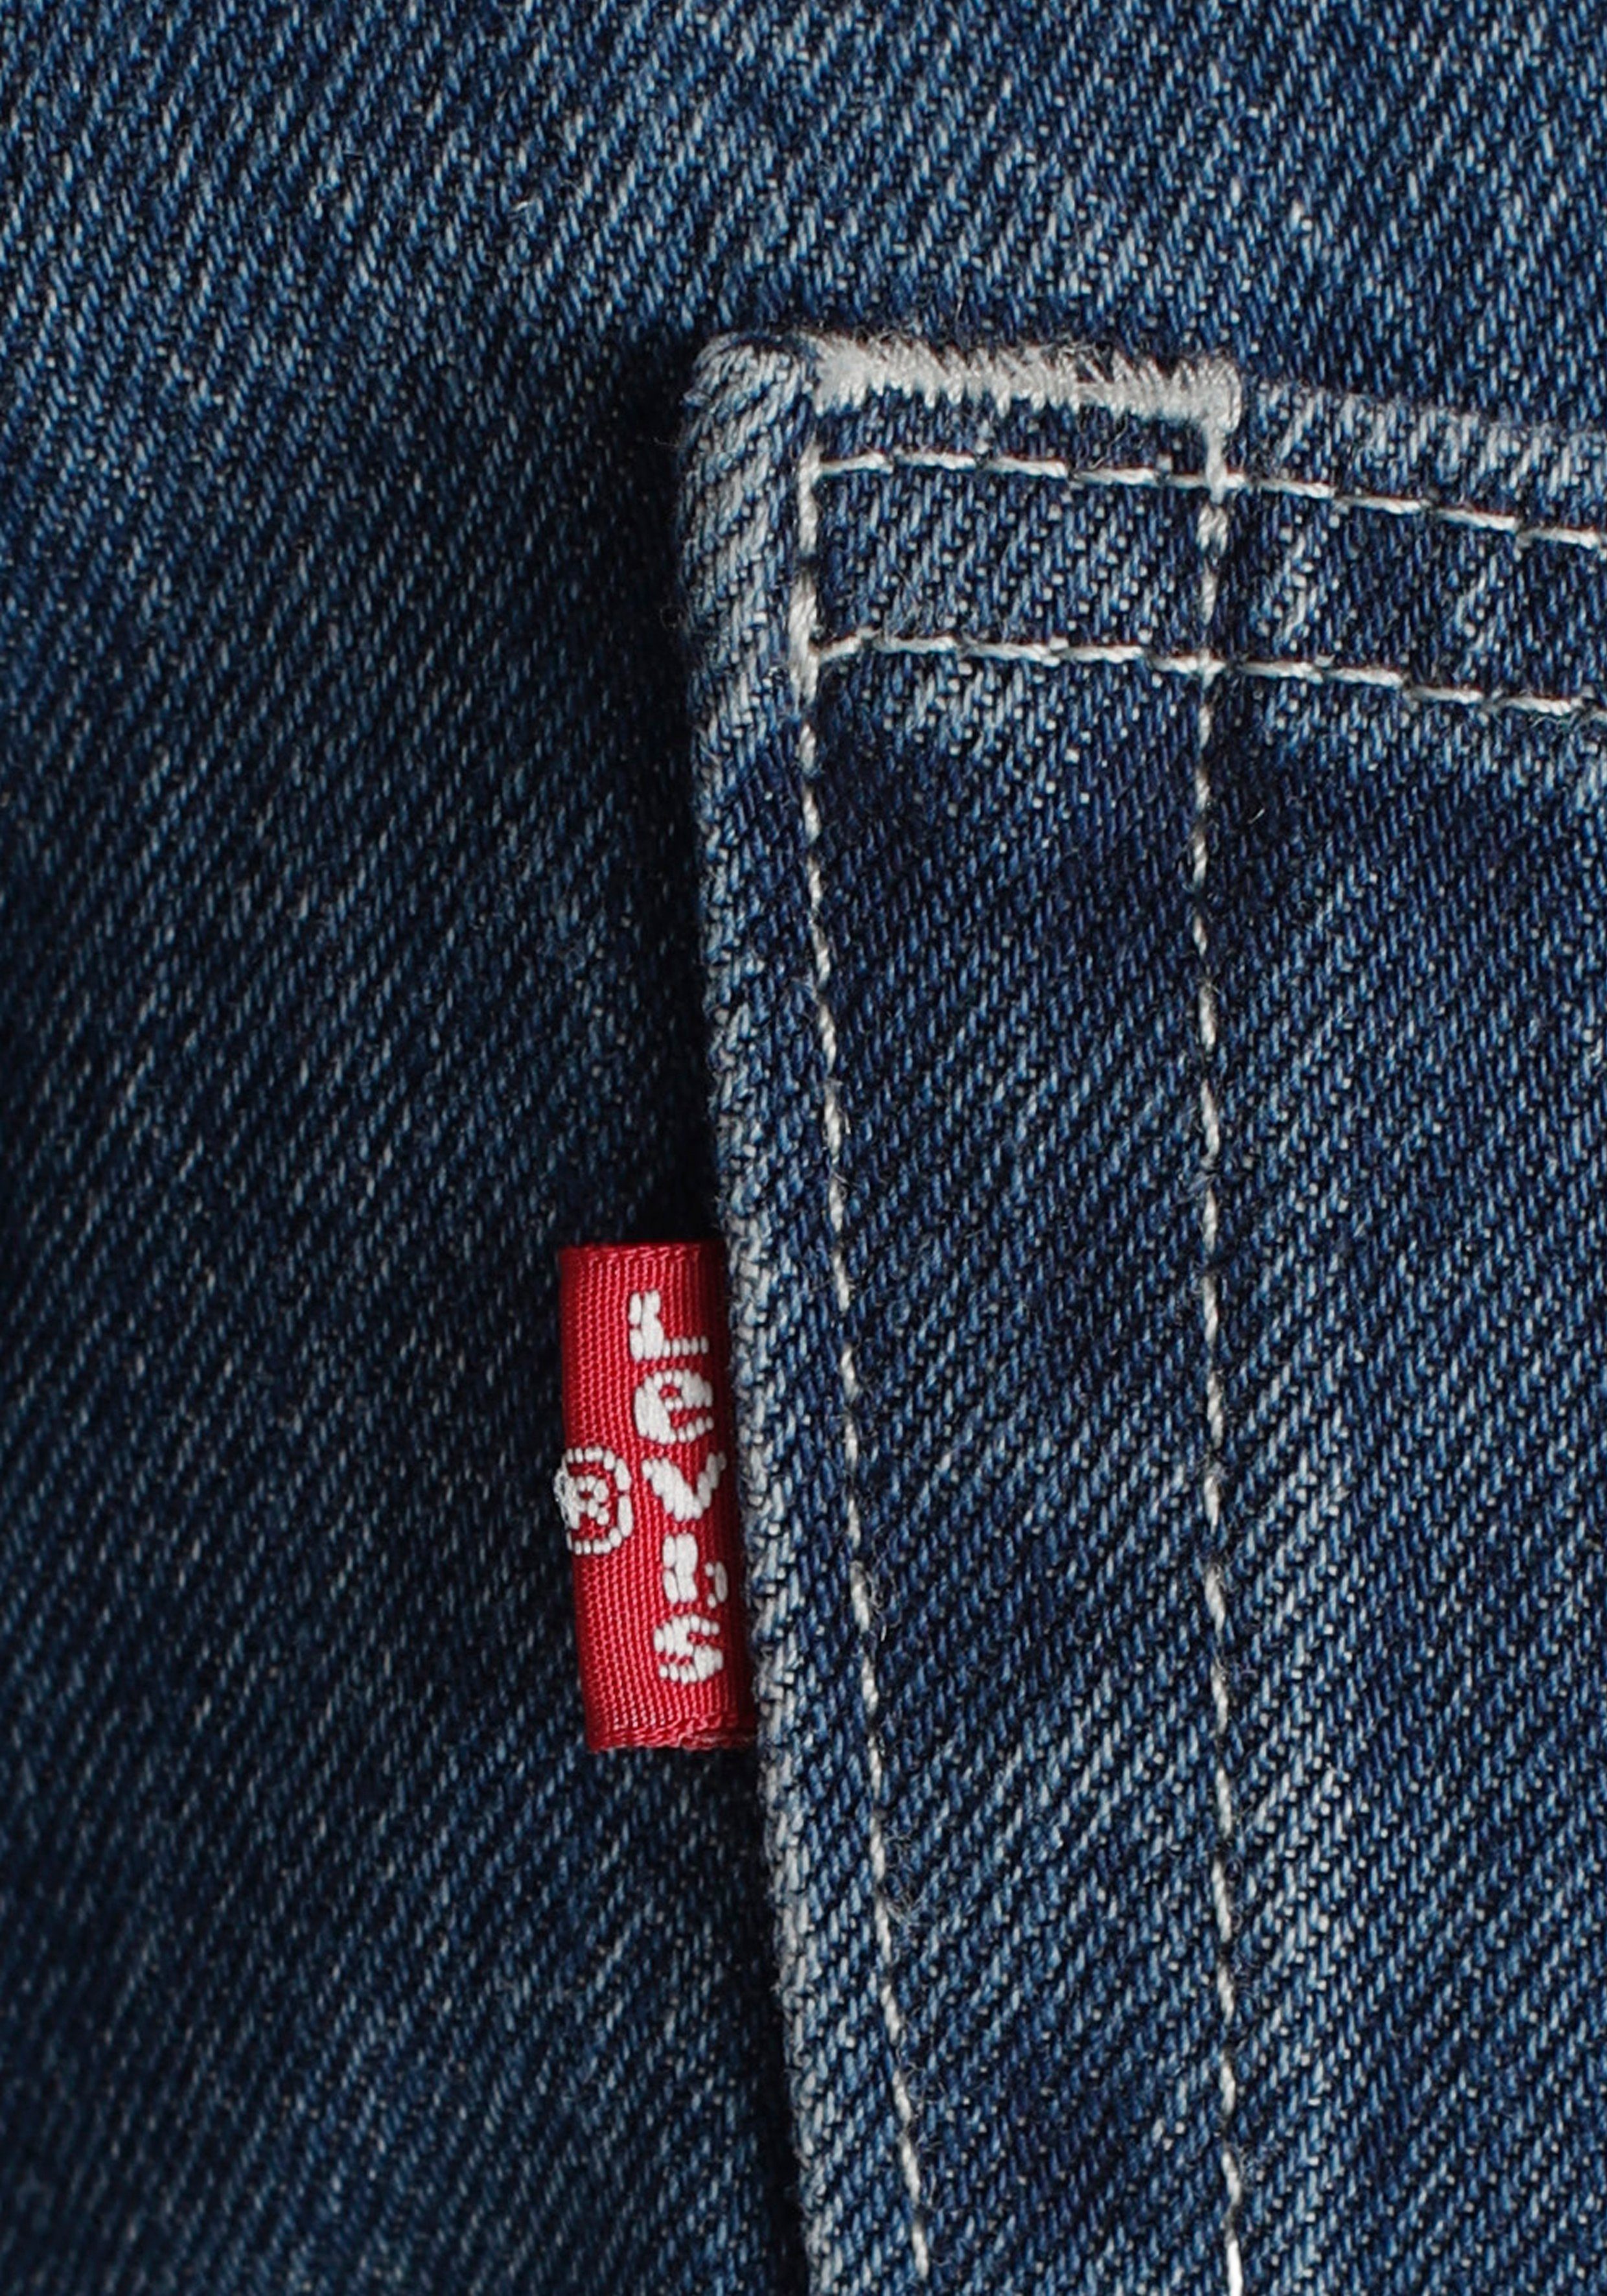 LOOSE 568 charm Cargojeans in CARPENTER STAY safe Levi's®